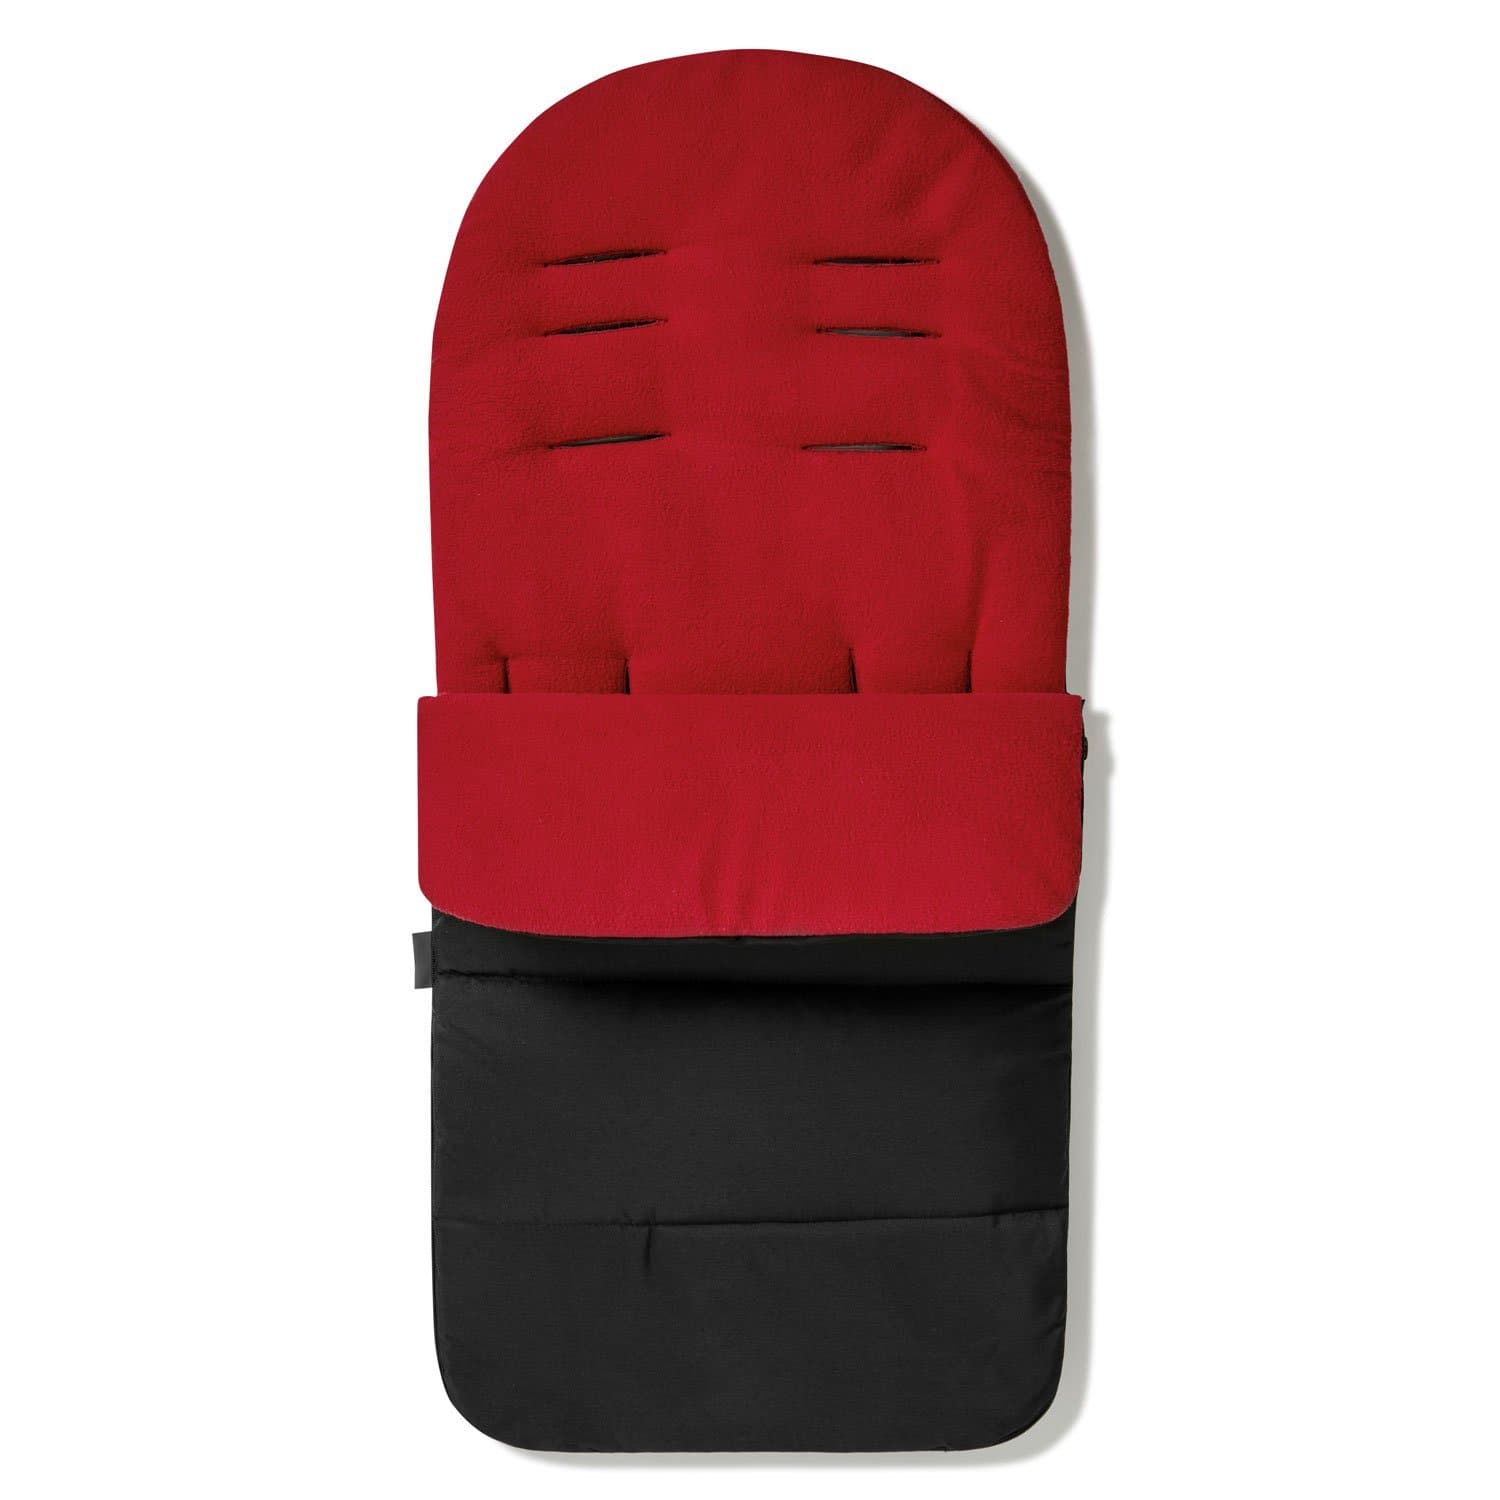 Premium Footmuff / Cosy Toes Compatible with Quax - Fire Red / Fits All Models | For Your Little One